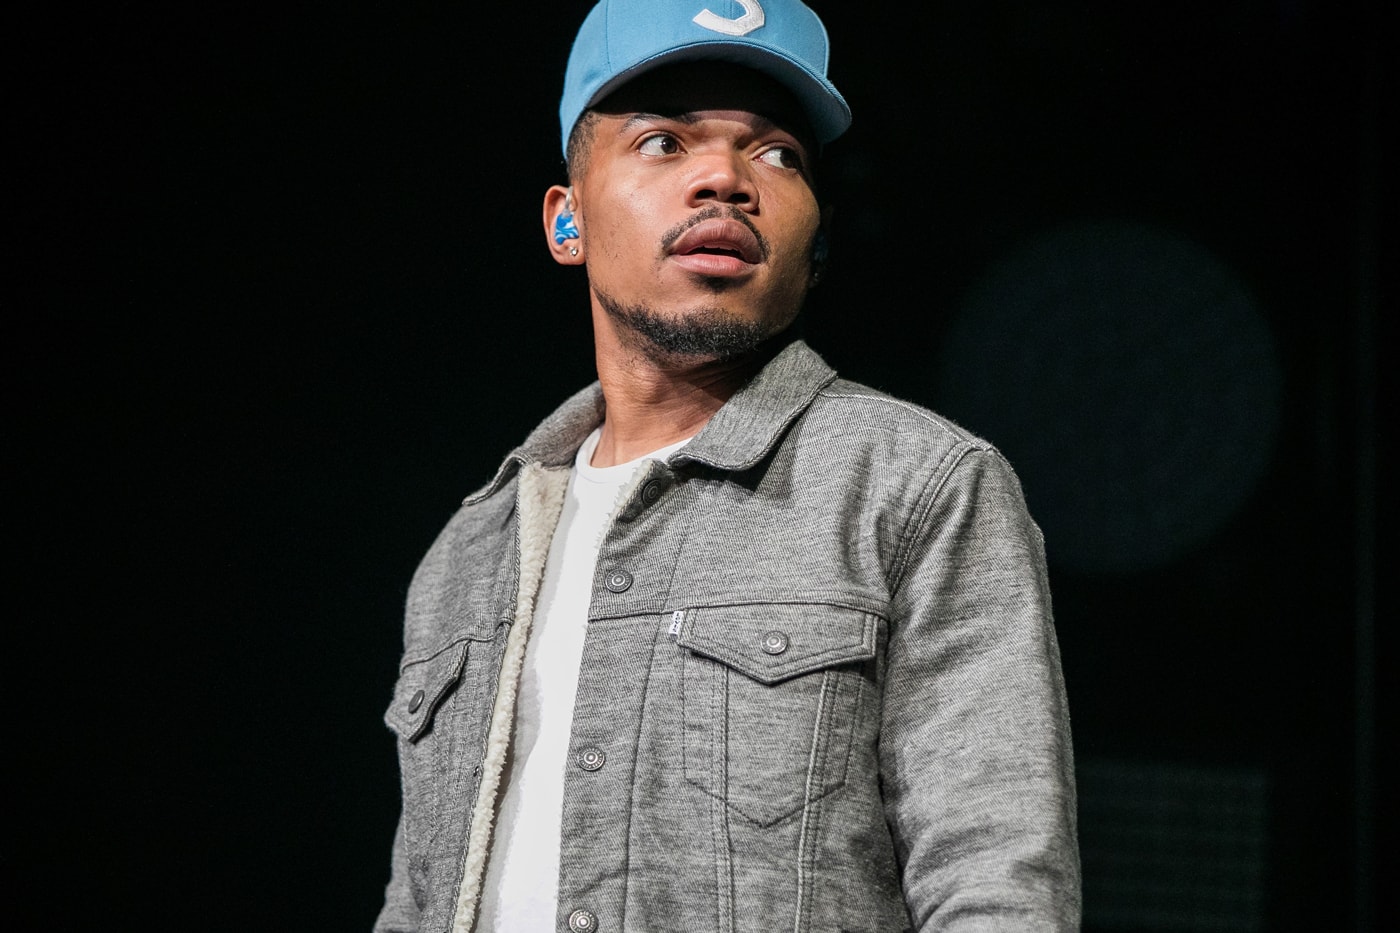 Chance the Rapper to Appear on Pharrell's Beats 1 Show OTHERtone